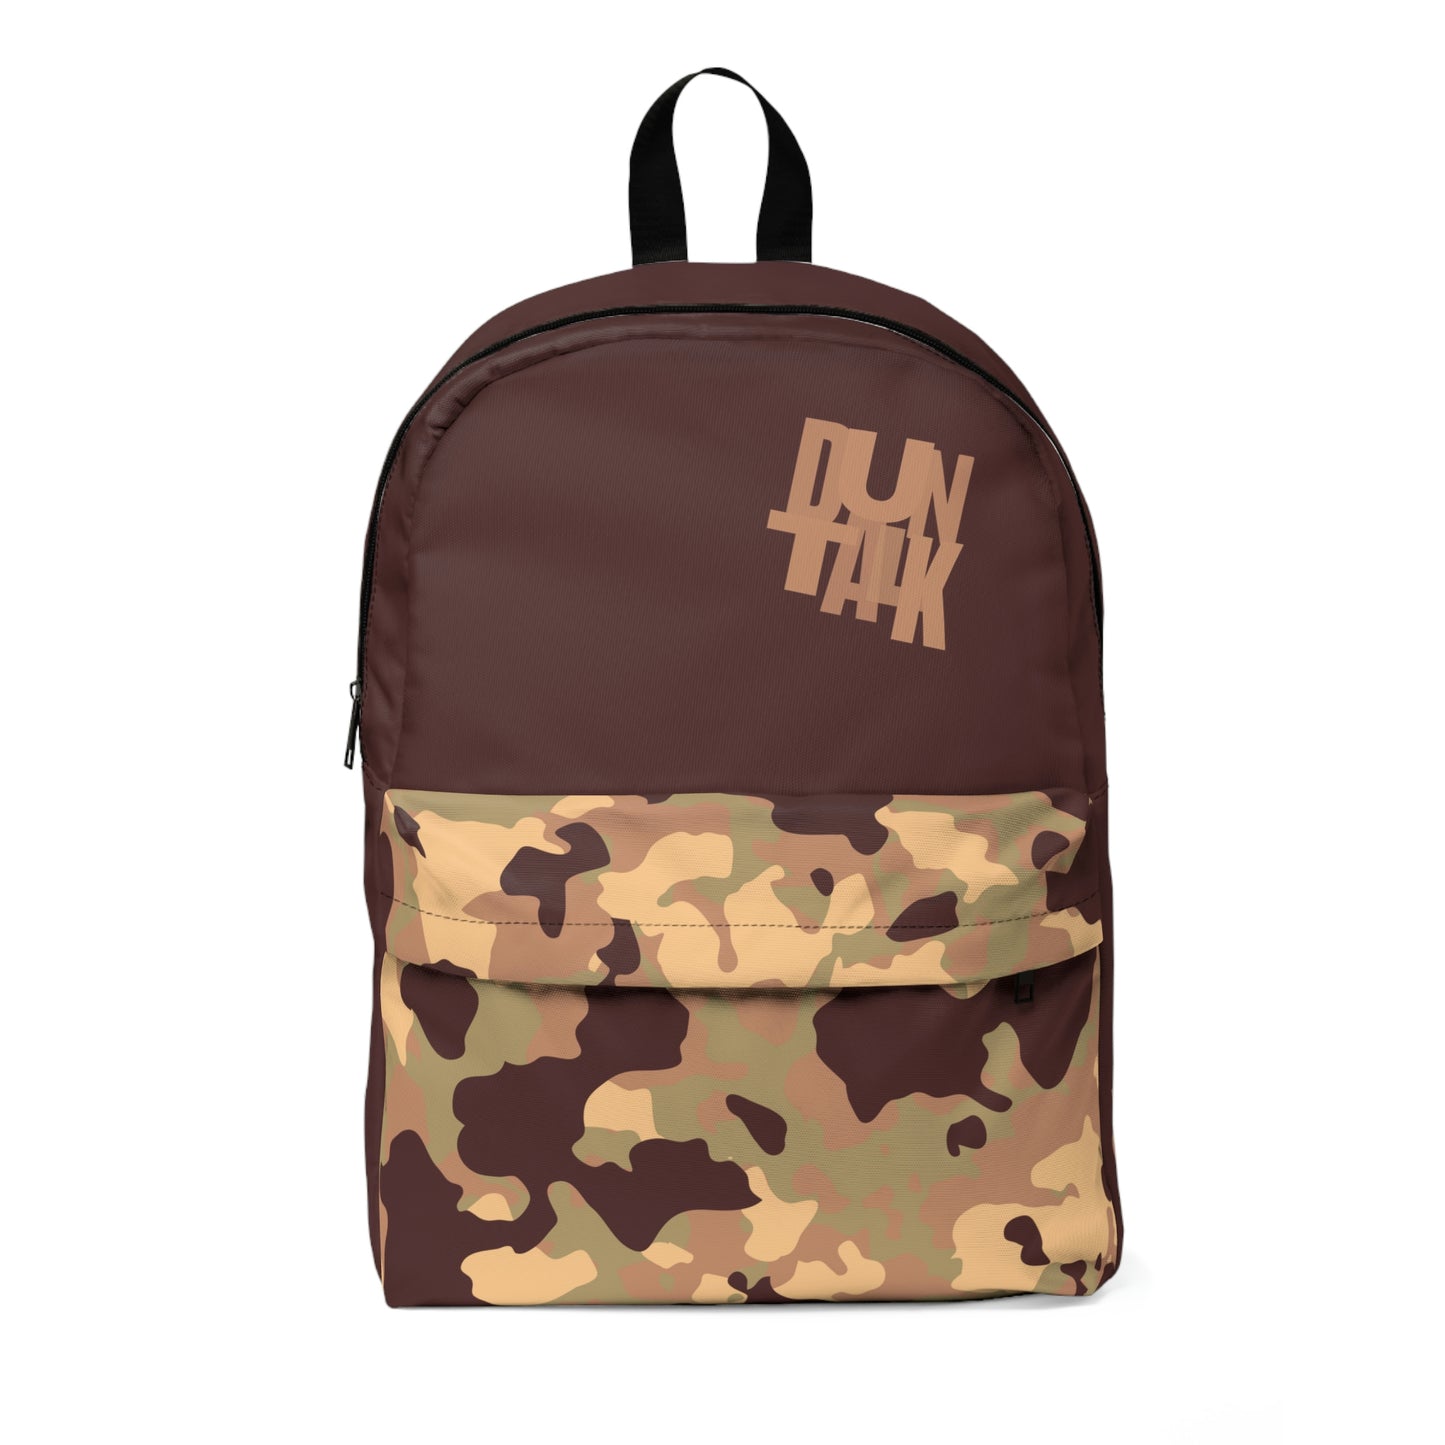 Dark brown backpack with "Duntalk" print written in light brown on the large pocket. Camouflage in green, brown, light brown, and nude on the smaller pocket.